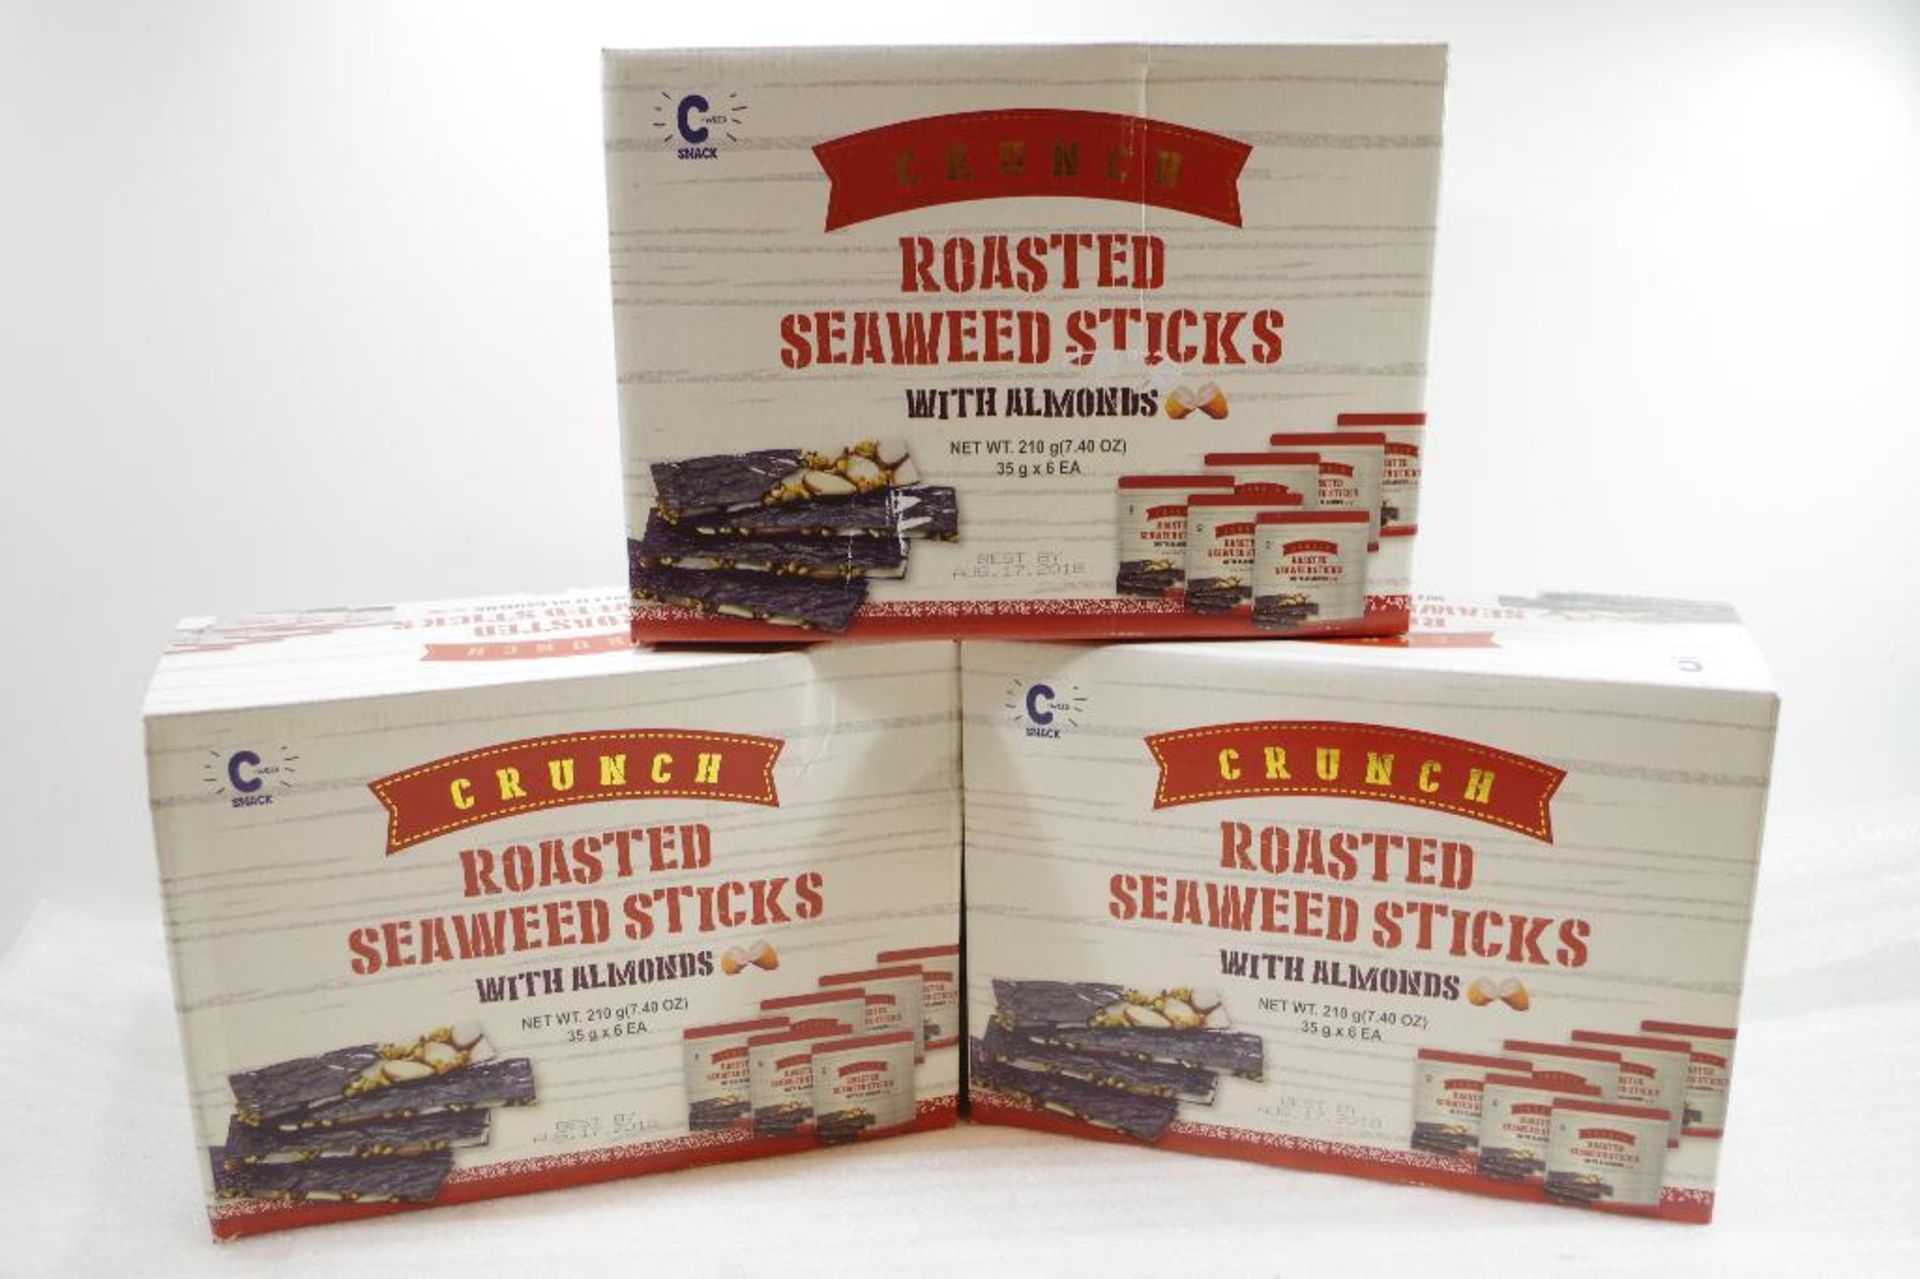 [18] NEW CRUNCH Roasted Seaweed Sticks w/ Almonds, Best by August 17, 2018 (3 Boxes of 6 each) - Image 3 of 3